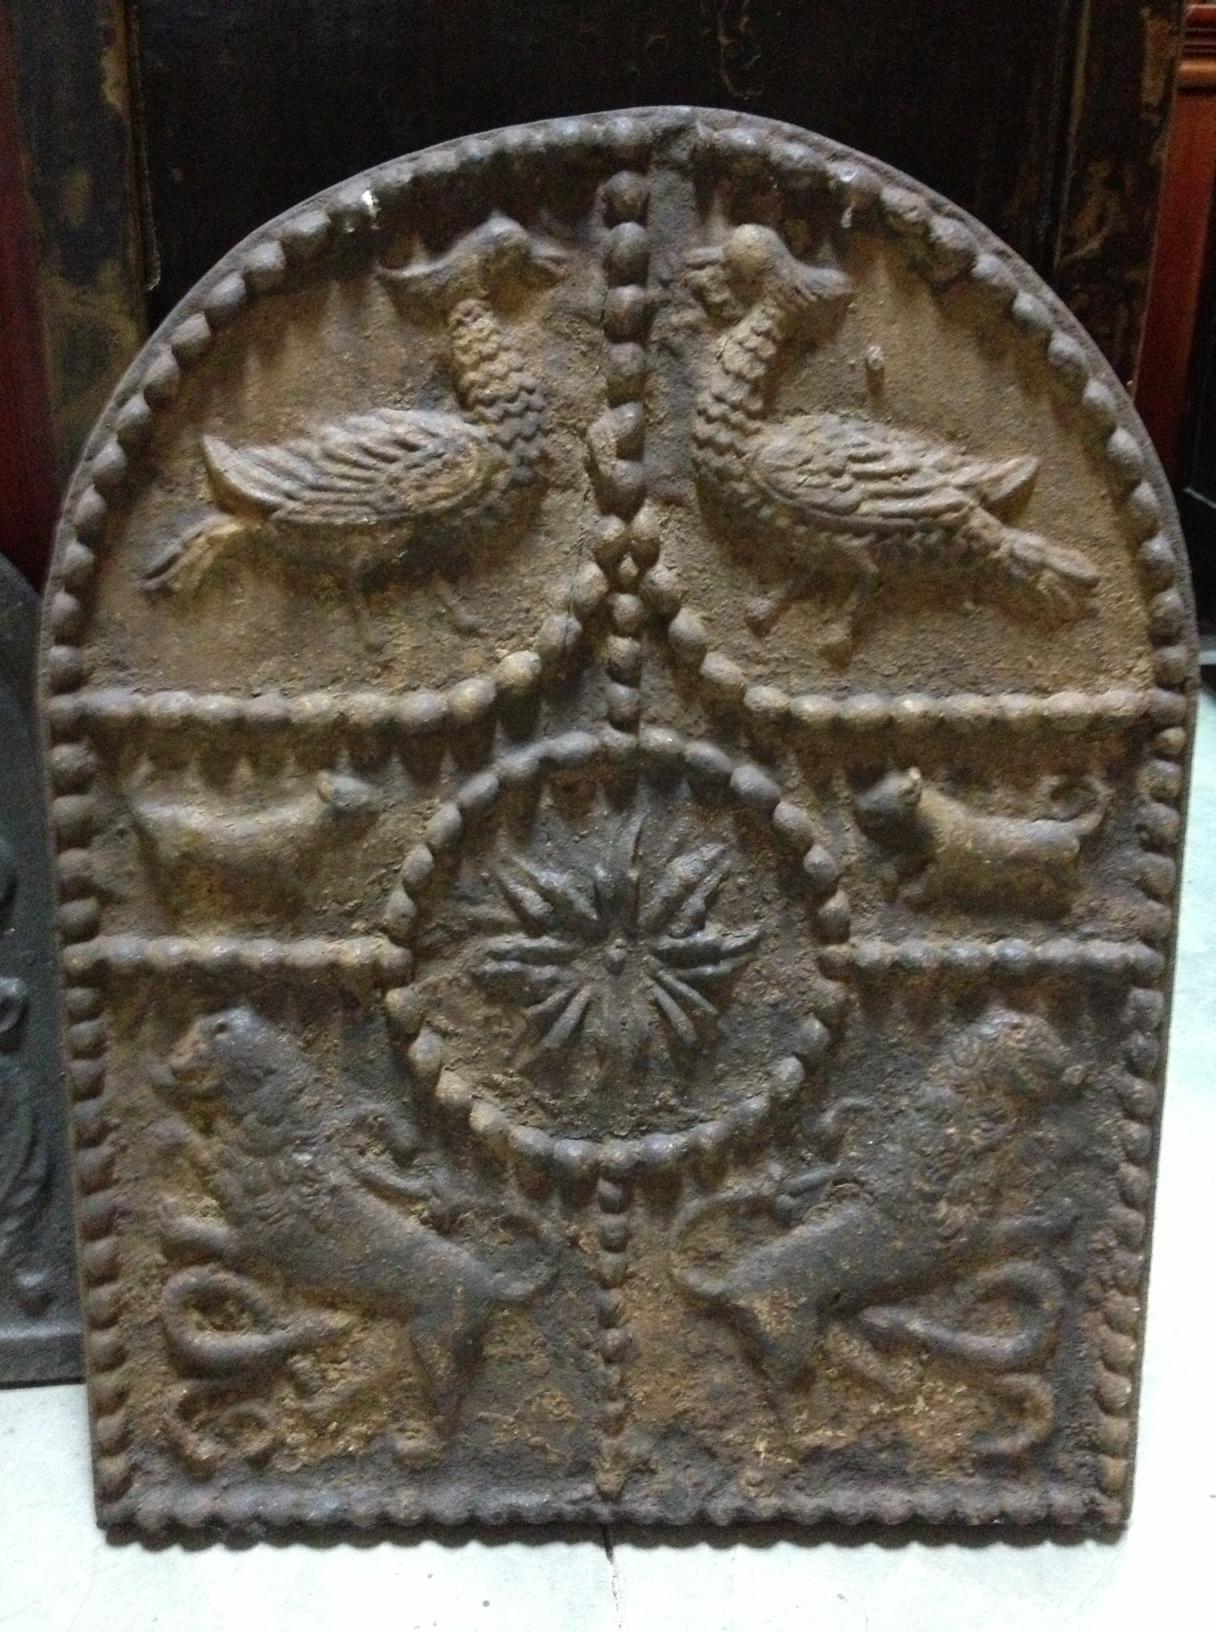 Cast iron fireplace plate decorated with a series of reliefs arranged within strips of pearls and following a symmetrical composition around a central floral motif. The animals (birds, quadrupeds and lions) facing and facing each other (the lions)